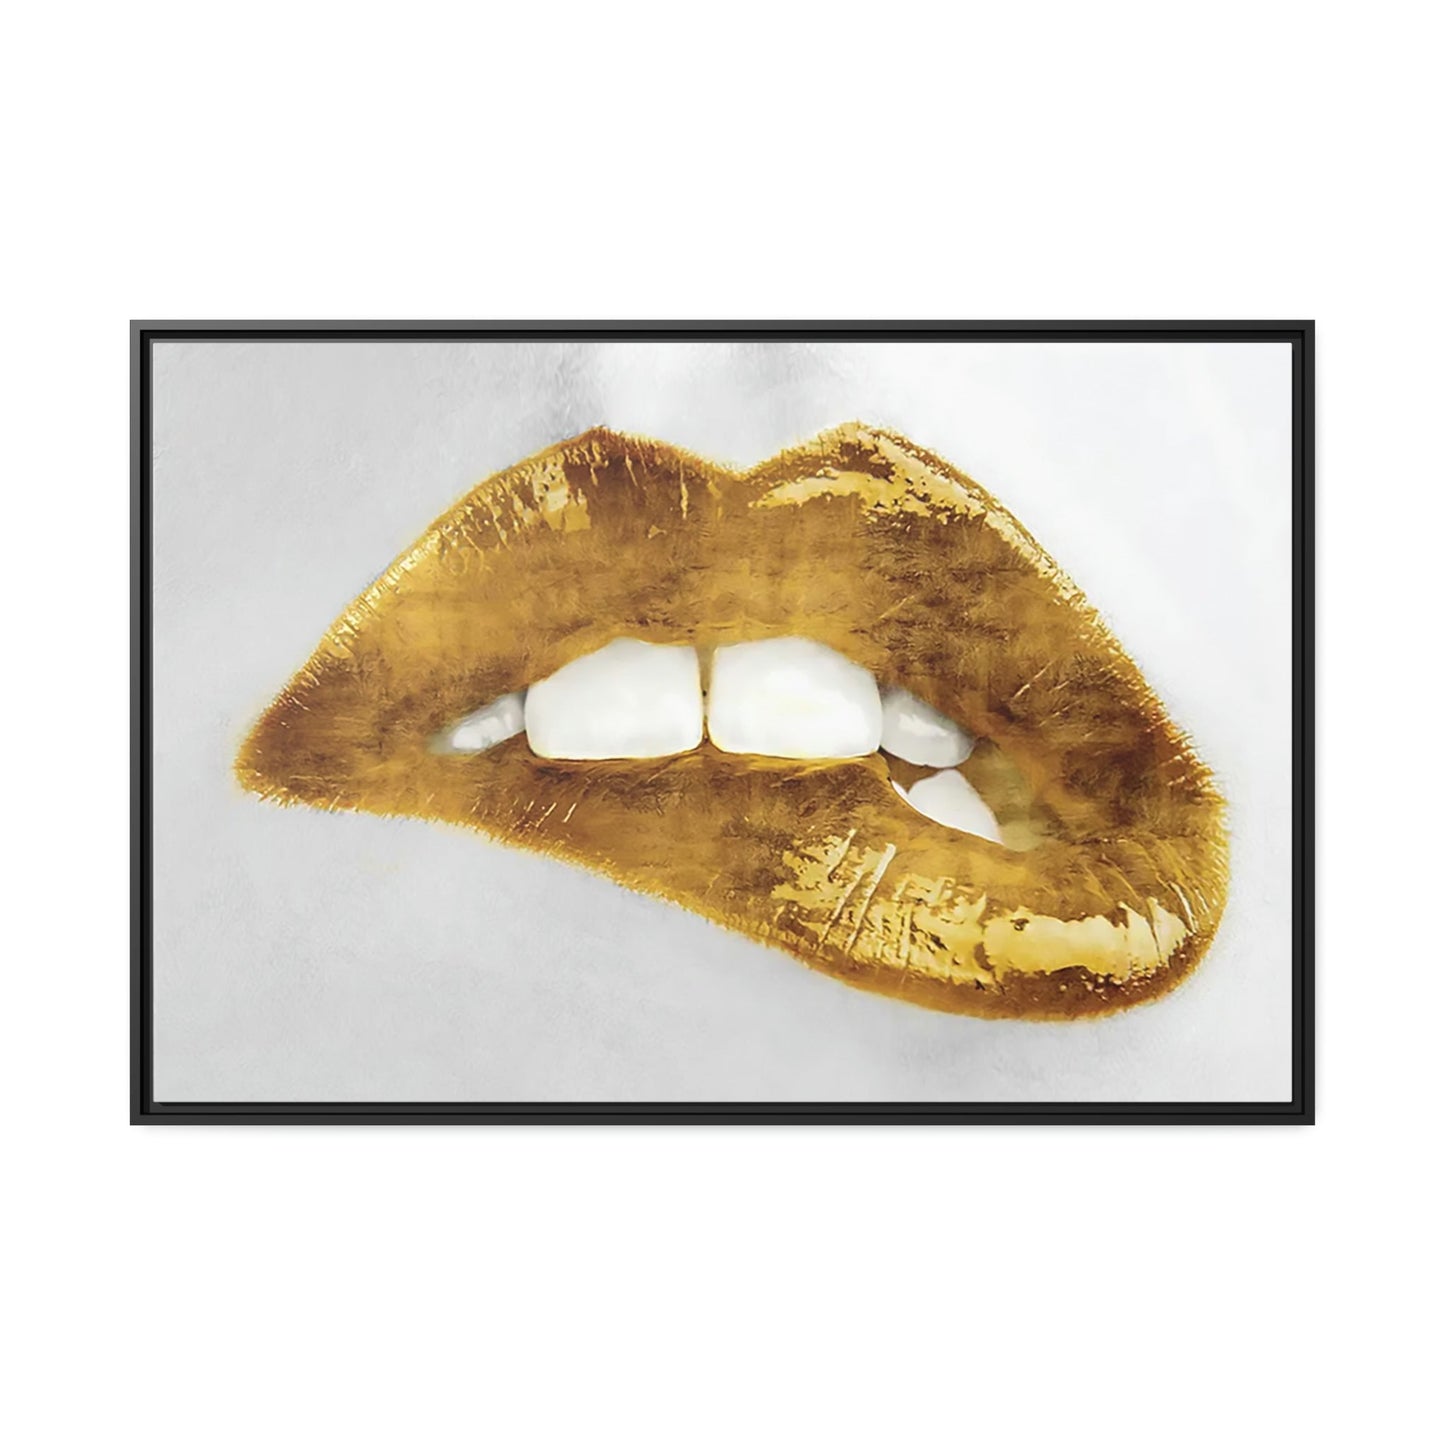 The Luxury of Gold: Elegant Framed Canvas Print for Your Home